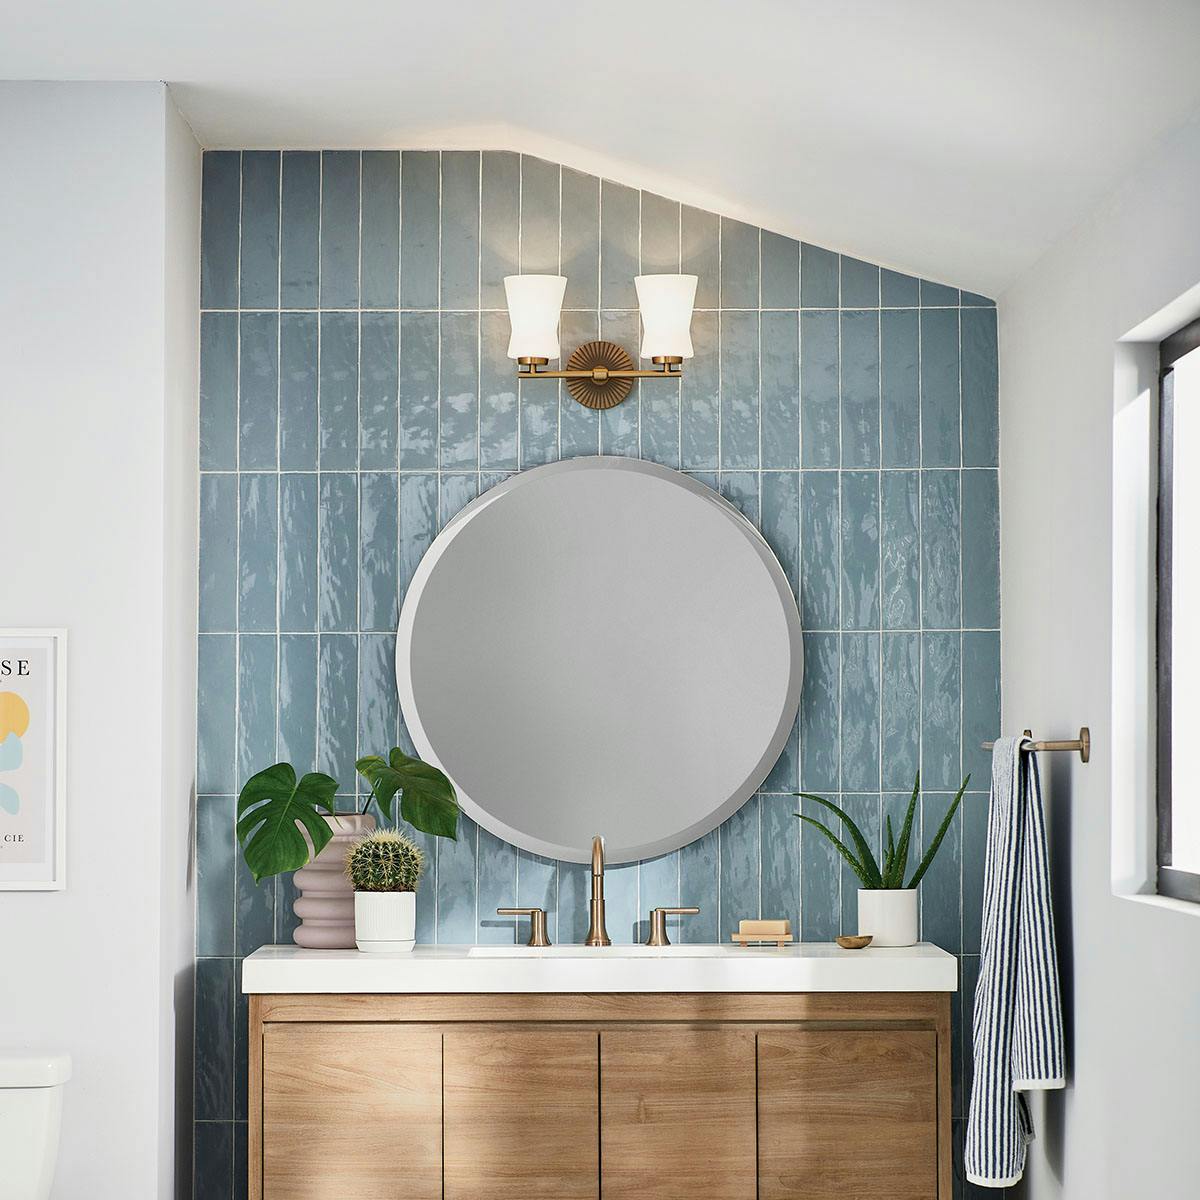 Day time Bathroom image featuring Brianne vanity light 55116BNB